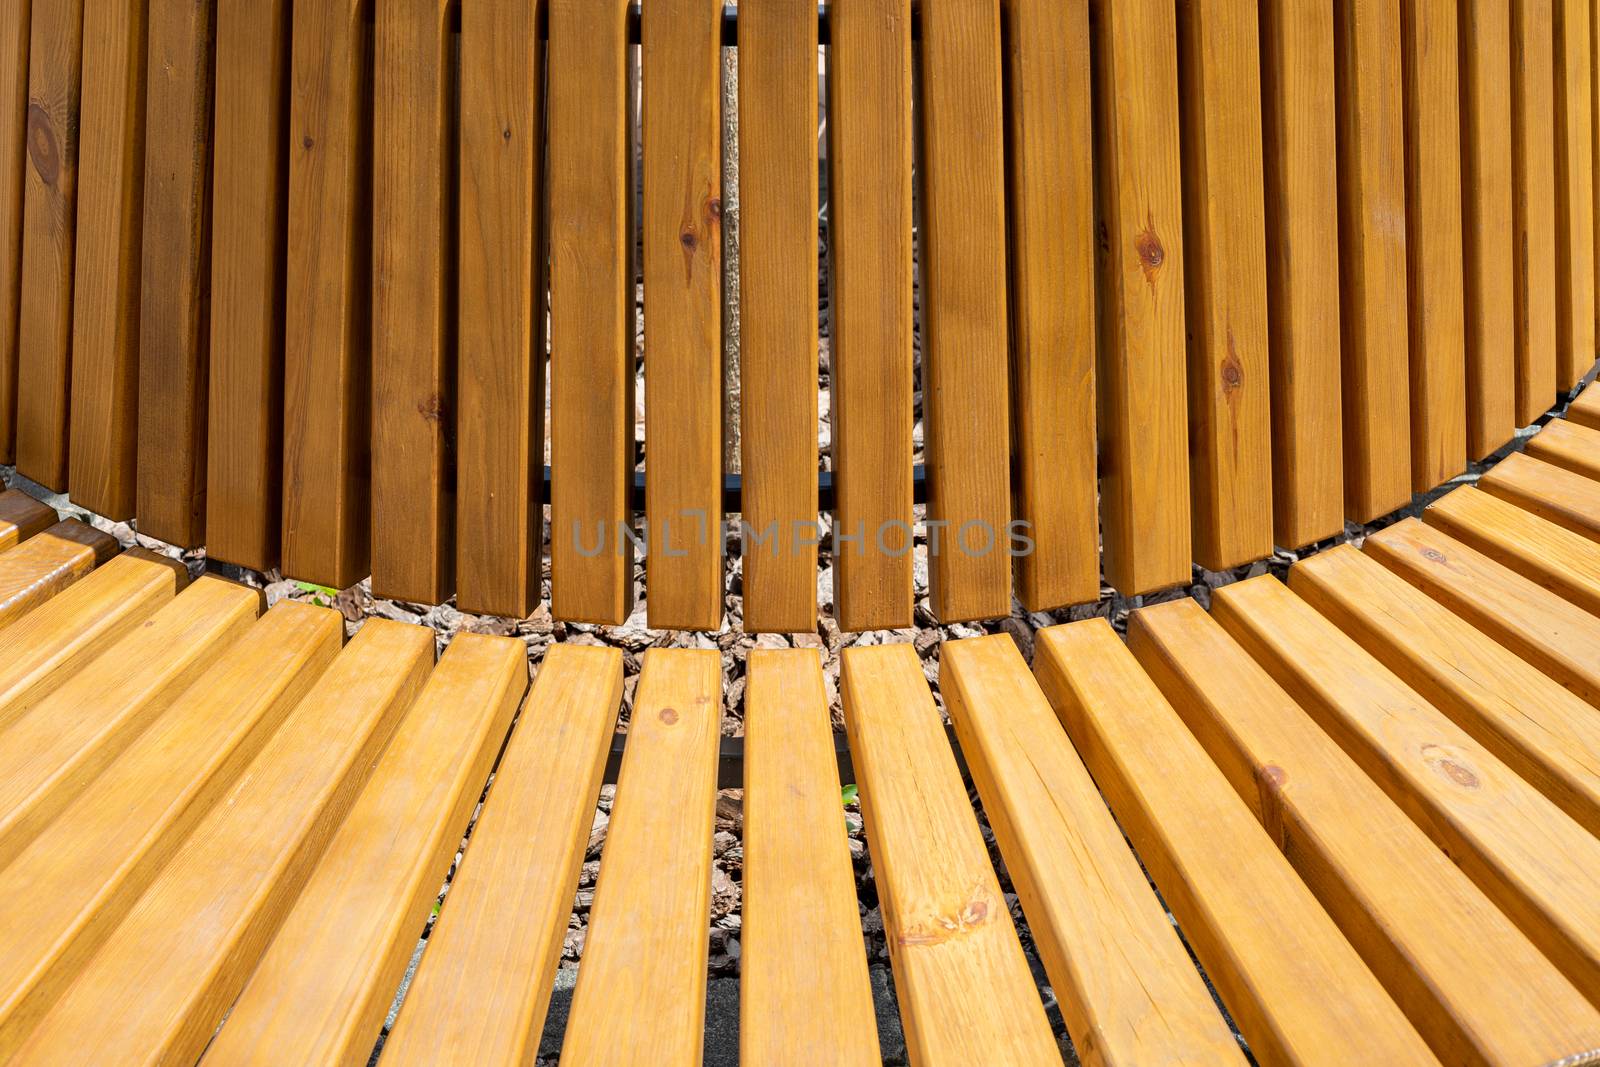 Bench with wooden boards close up. Background from wooden boards arranged in a semicircle by Serhii_Voroshchuk